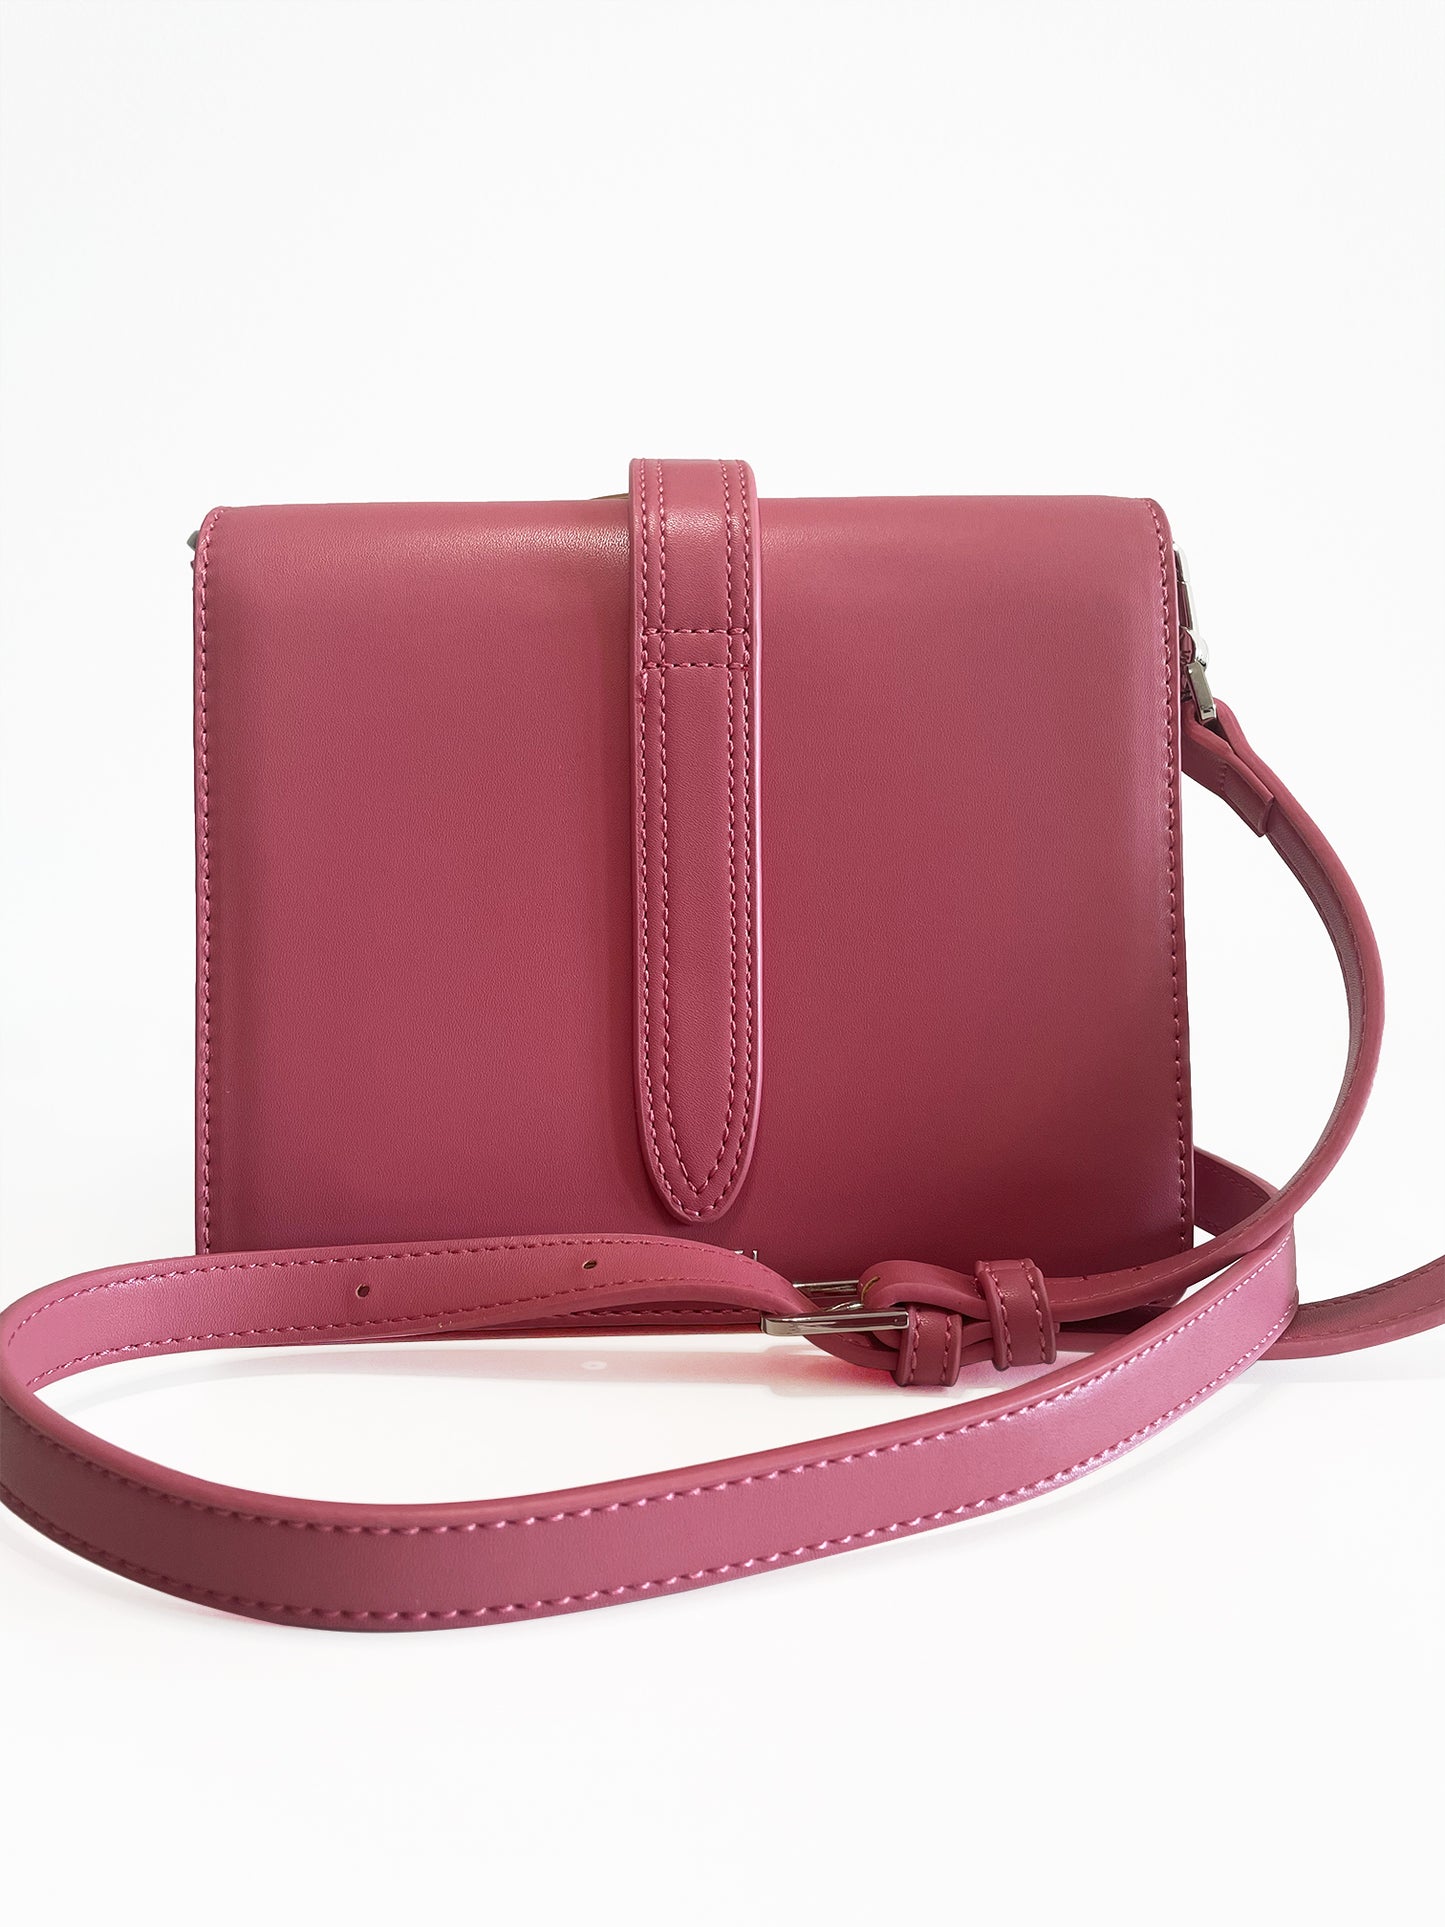 Abbey Pink Bag with Wooden Handle